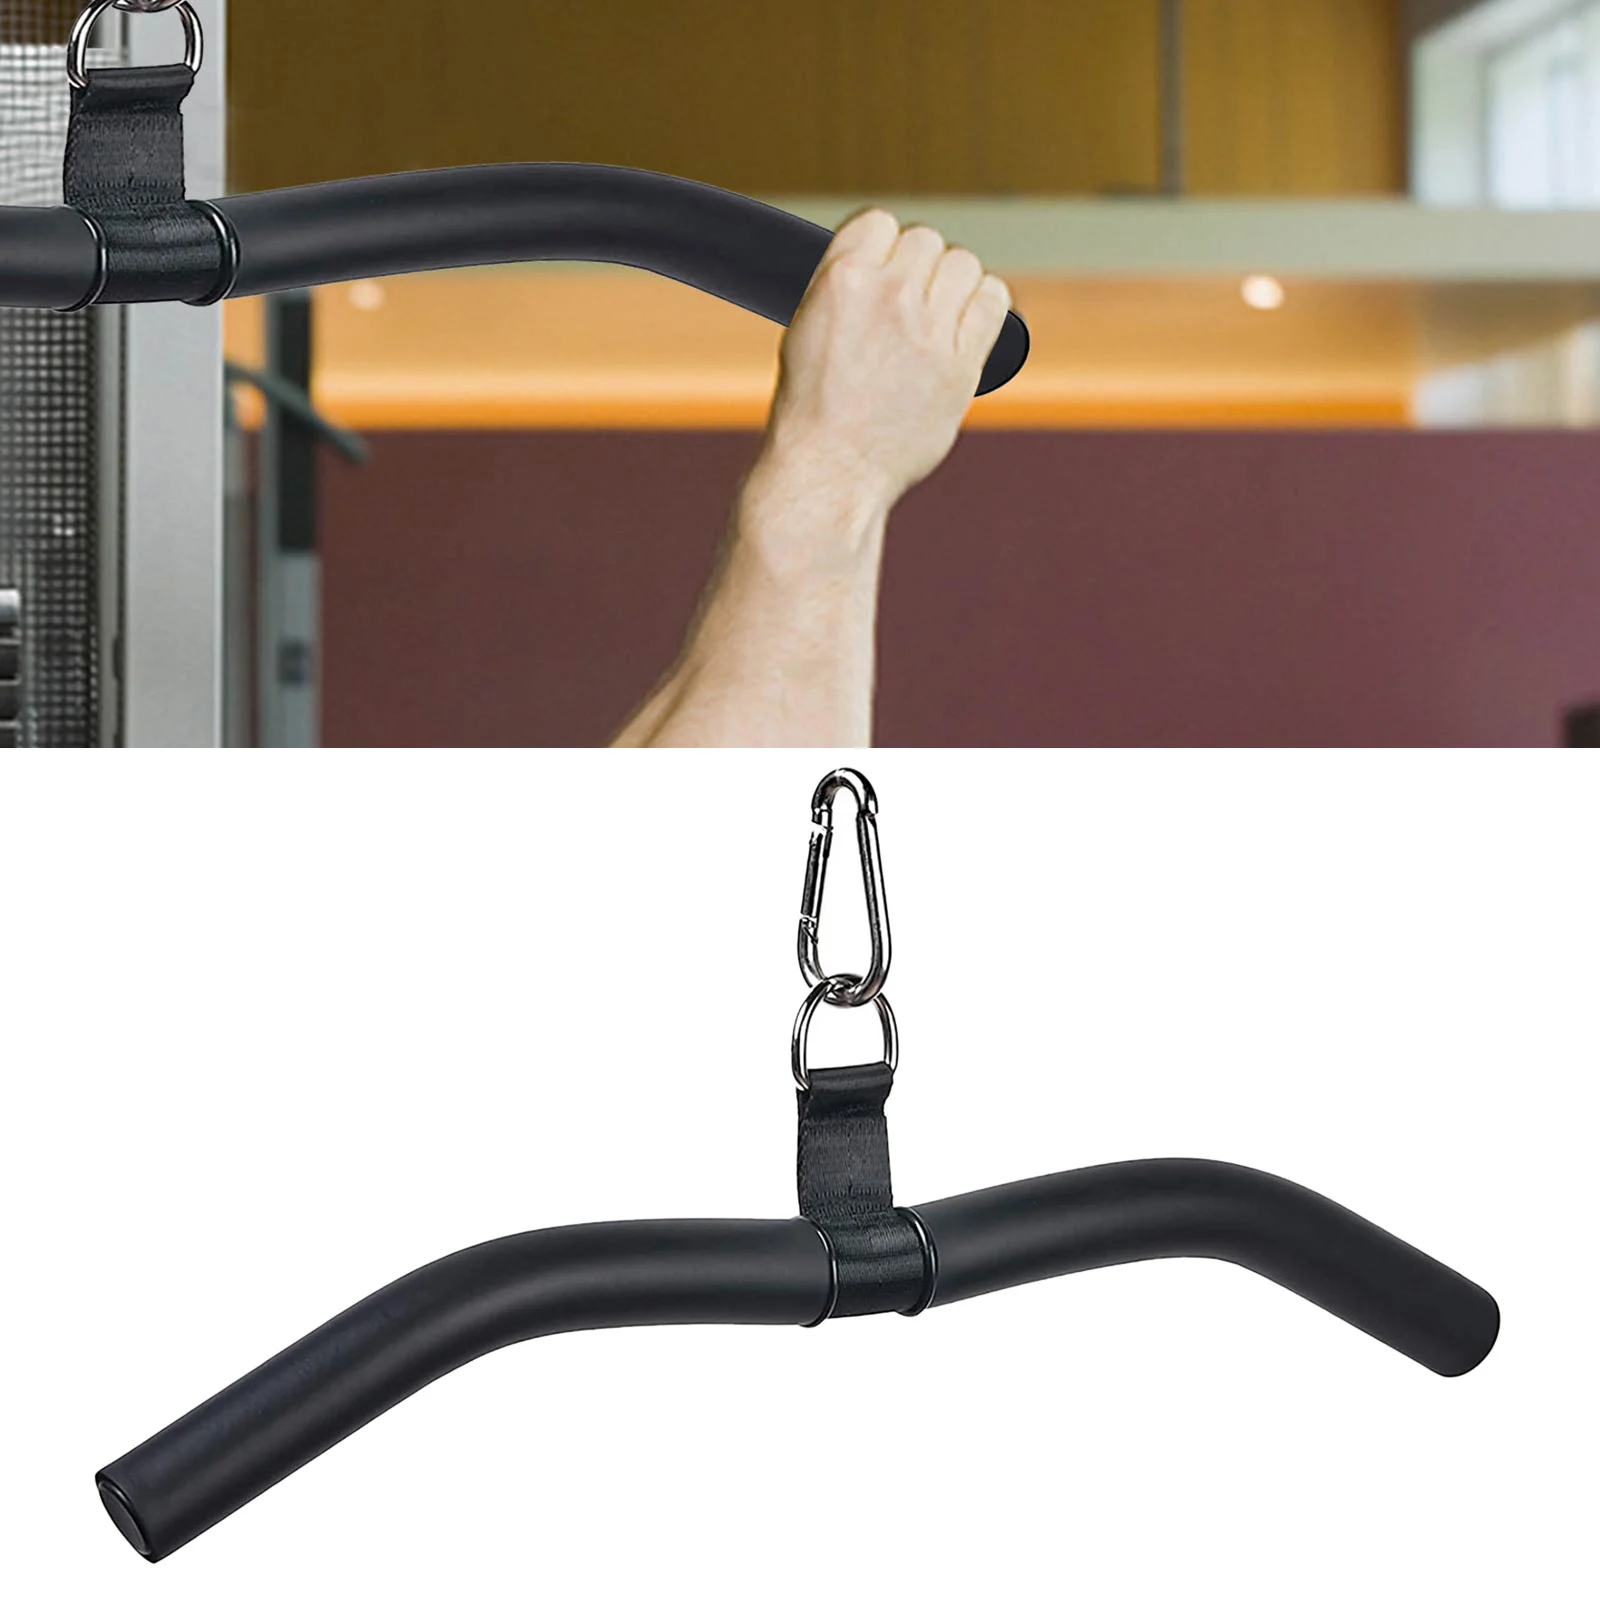 Lat Pull Down Bar Attachment For Home Gym Workout Seated Rowing Exercise Back Muscles Arm Muscles Accessories For Pulley System